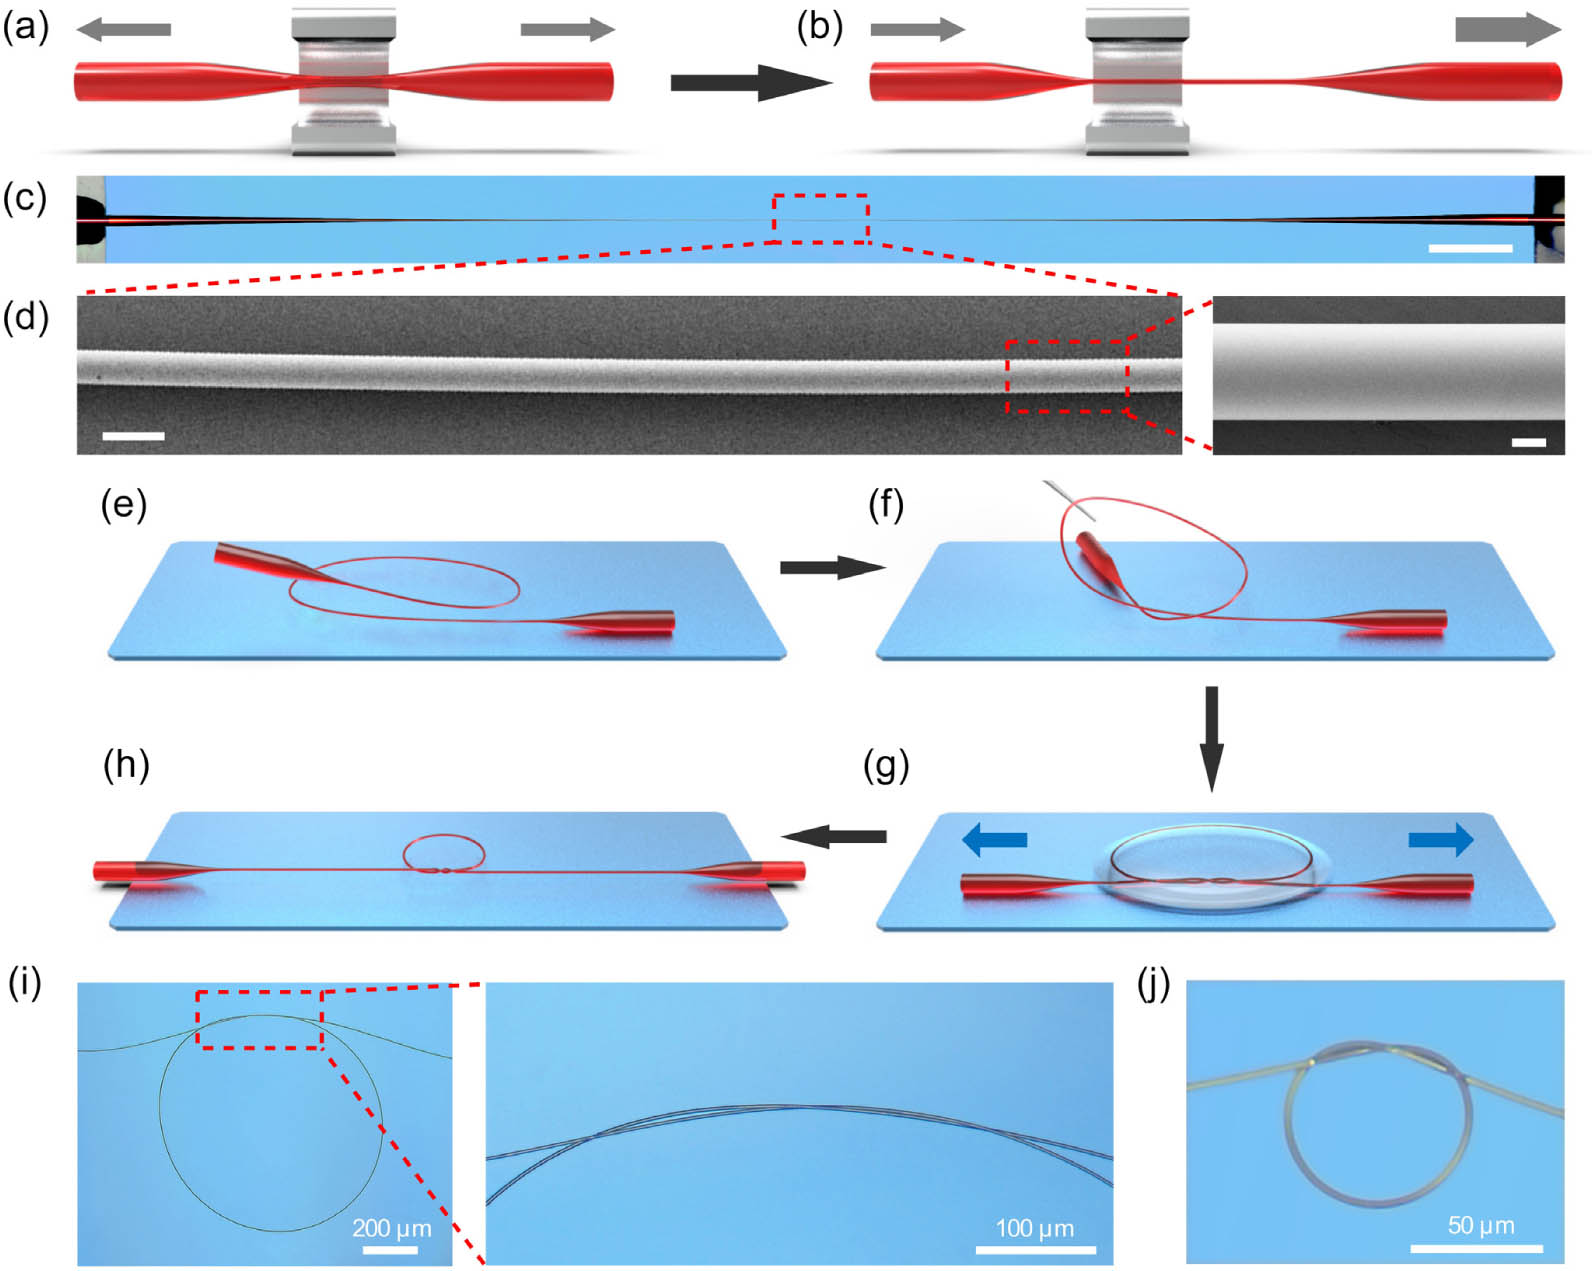 Fabrications of ChG microfibers and ChG MKRs. (a) and (b) Schematic illustrations of fabrication of a ChG microfiber with controllable waist length and diameter. (c) Optical micrograph of a biconically tapered ChG fiber consisting of a 5.6 μm diameter, 5 mm length ChG microfiber at the central area, and 14 mm length taper area connected to 250 μm diameter initial fiber at both ends. Scale bar, 2 mm. (d) Scanning electron microscope (SEM) image of the microfiber showing the high diameter uniformity. Scale bar, 10 μm. Inset: close-up SEM image of the microfiber, showing excellent sidewall smoothness of the microfiber. Scale bar, 2 μm. (e)–(h) Schematic illustrations of assembly of a ChG MKR in liquid. (i) Optical micrograph of an as-assembled 824 μm diameter ChG MKR using a 3.2 μm diameter ChG microfiber. Inset: close-up optical micrograph of the intertwisted overlap area with an effective coupling length of about 200 μm. (j) Optical micrograph of a 62 μm diameter ChG MKR assembled from a 3.5 μm diameter ChG microfiber.